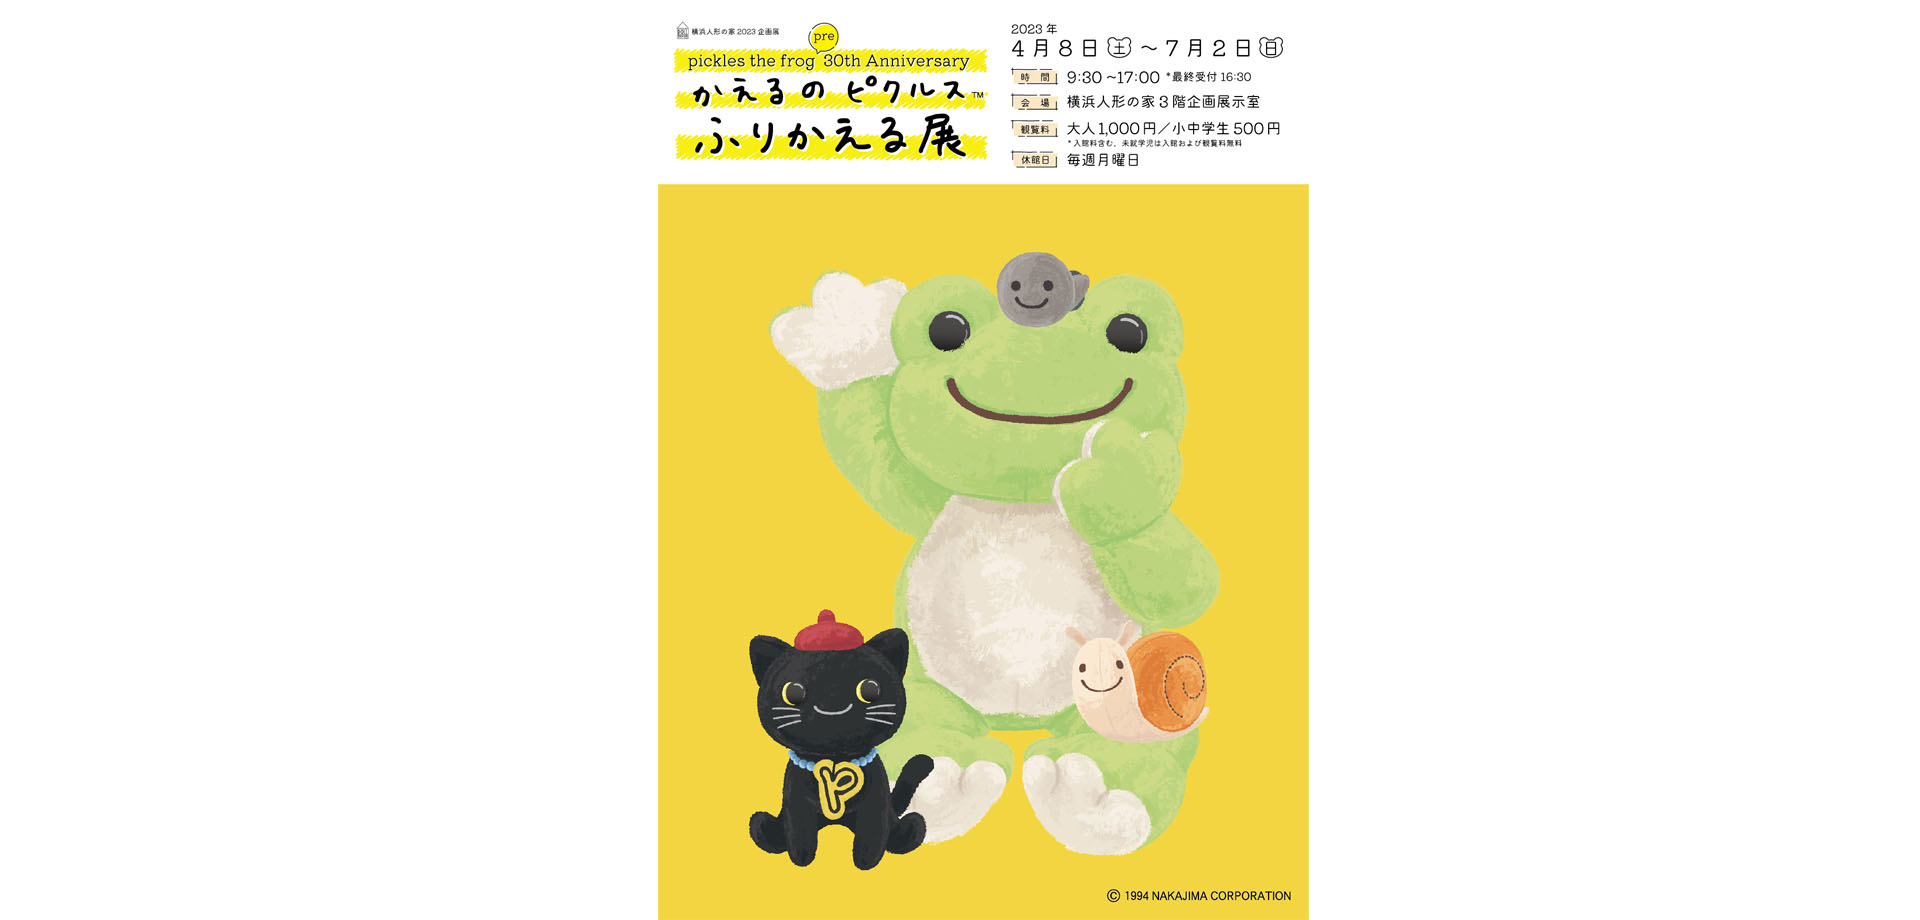 pickles the frog pre 30th Anniversary　かえるのピクルス「ふりかえる展」横浜人形の家